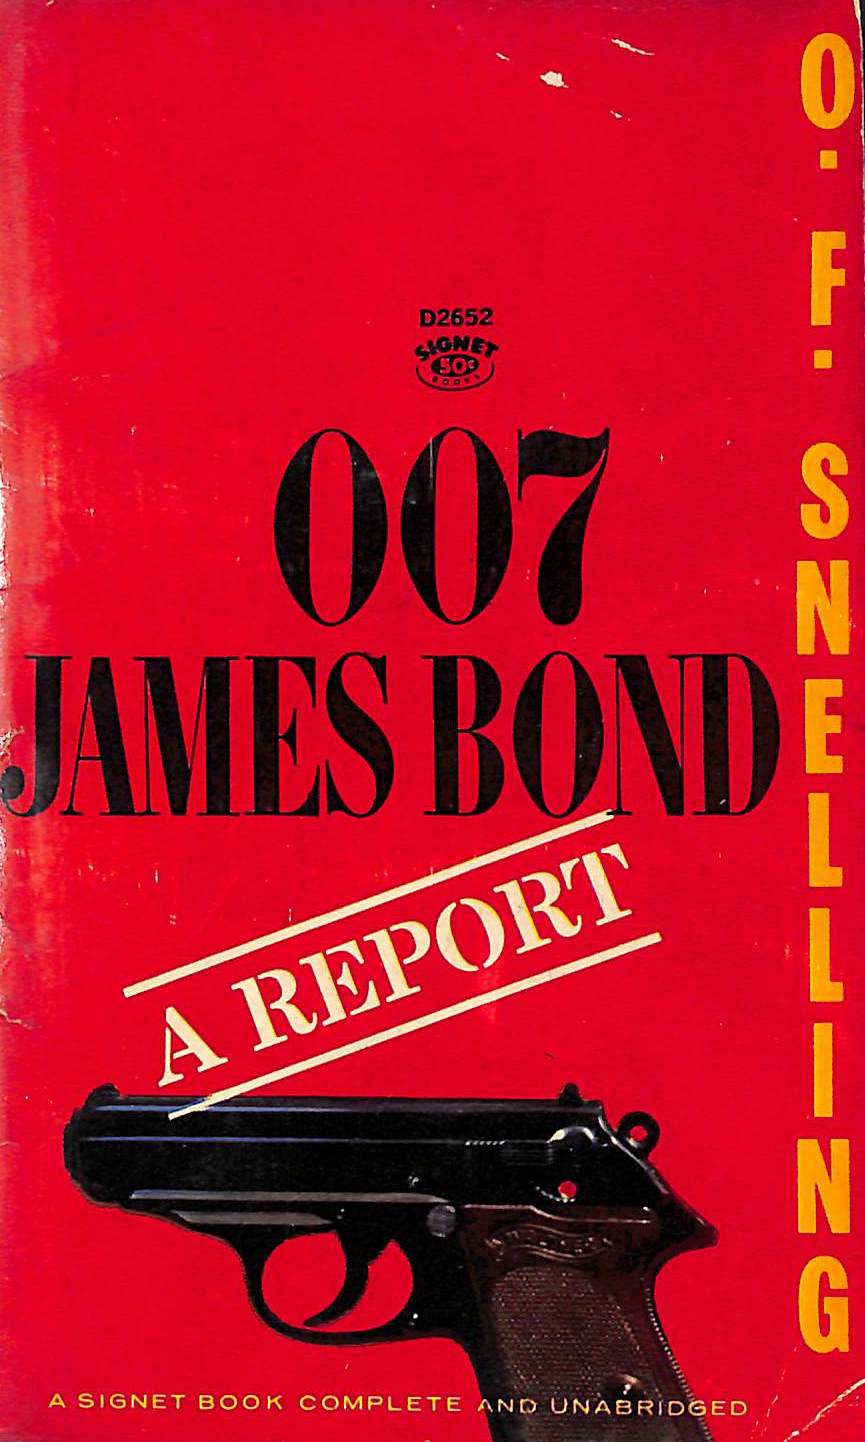 "007 James Bond: A Report" 1965 SNELLING, O.F.